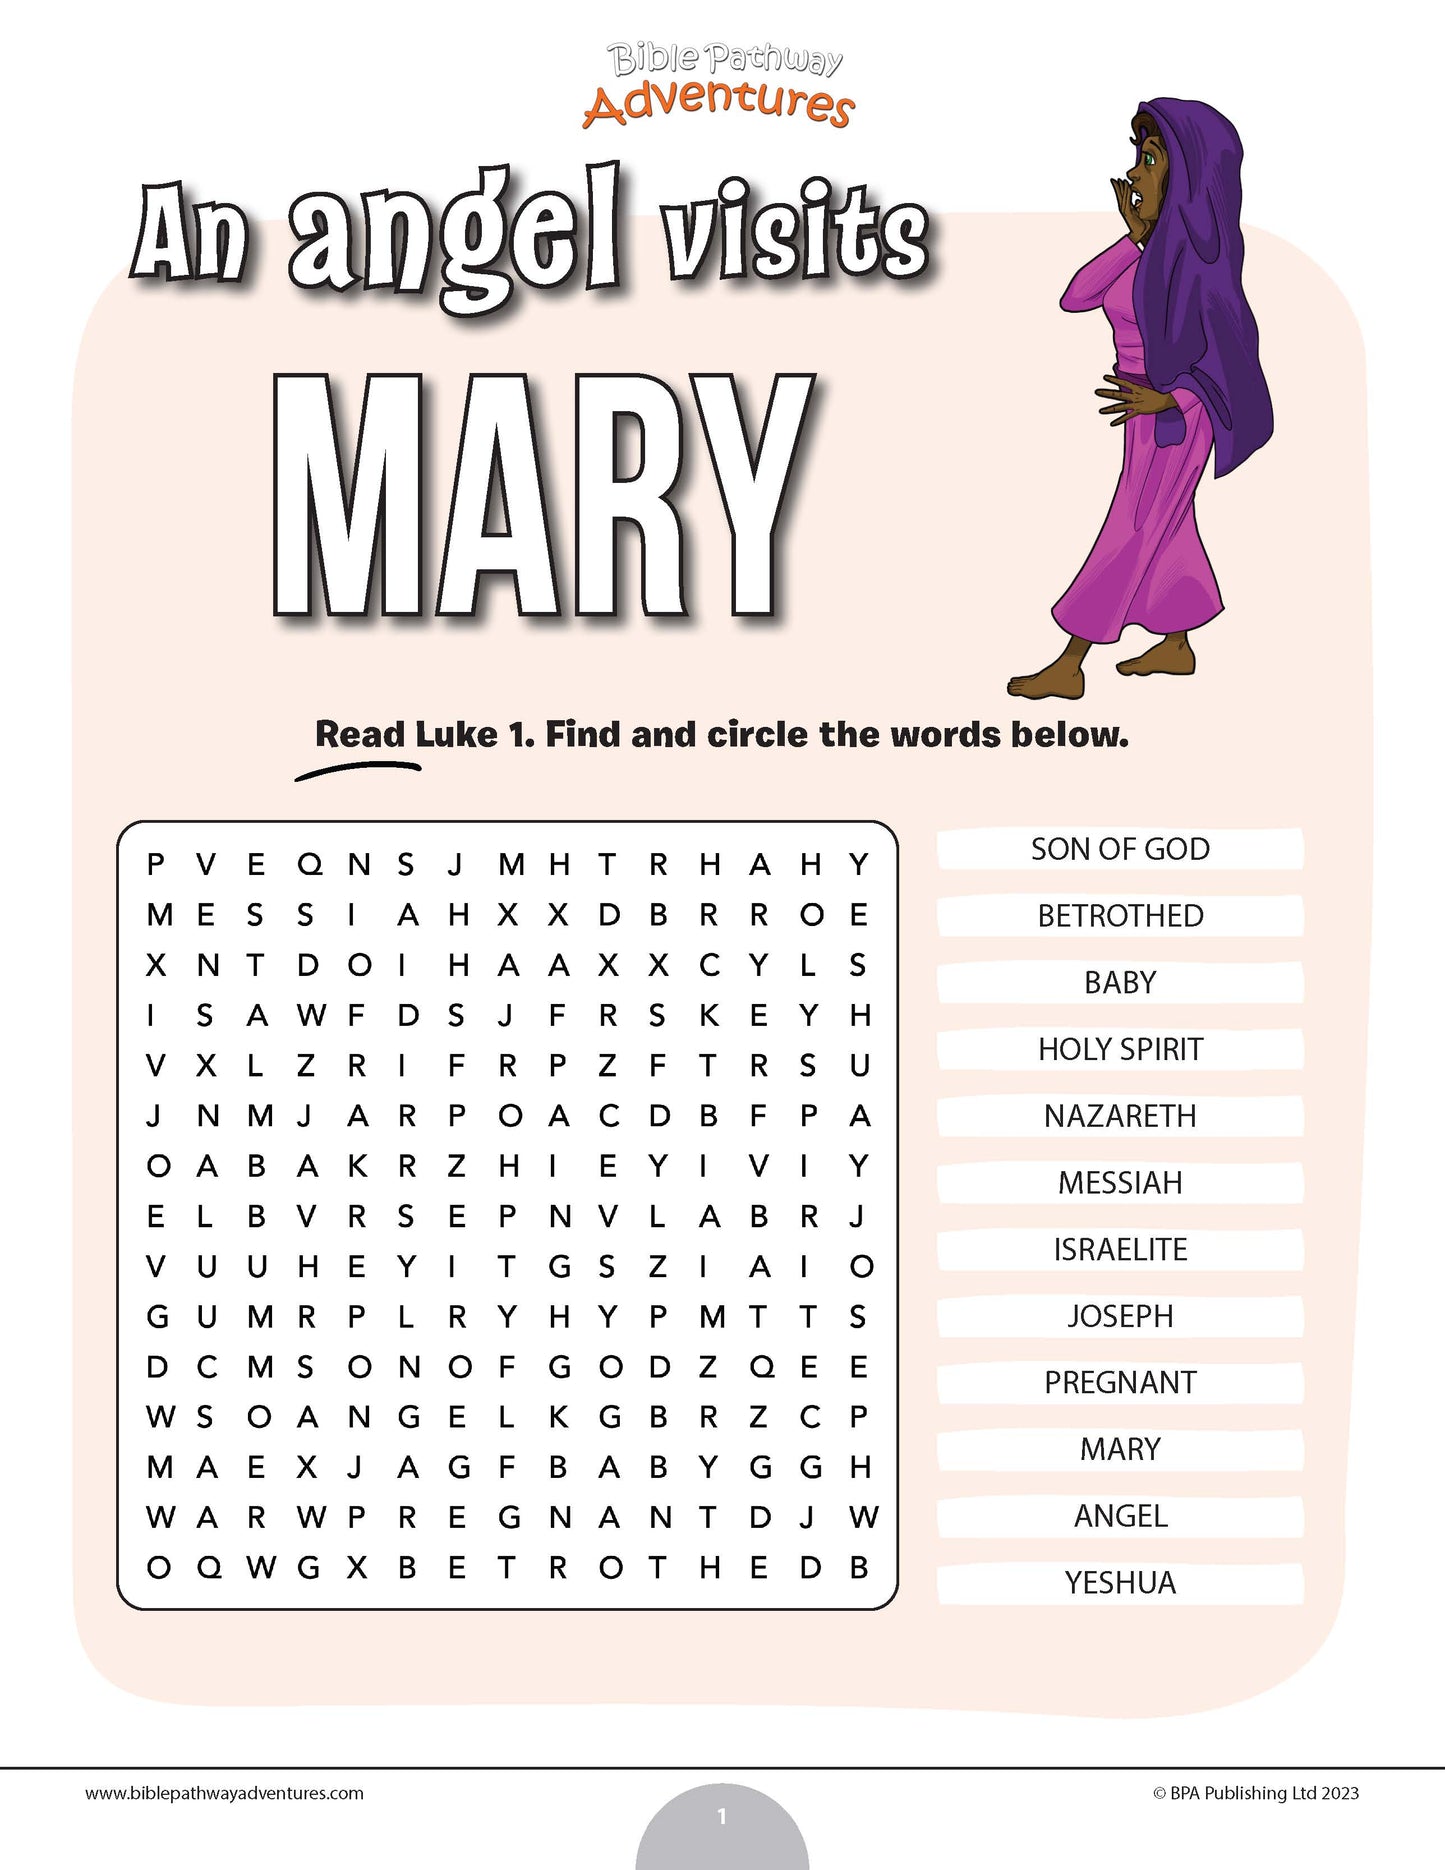 An Angel visits Mary word search